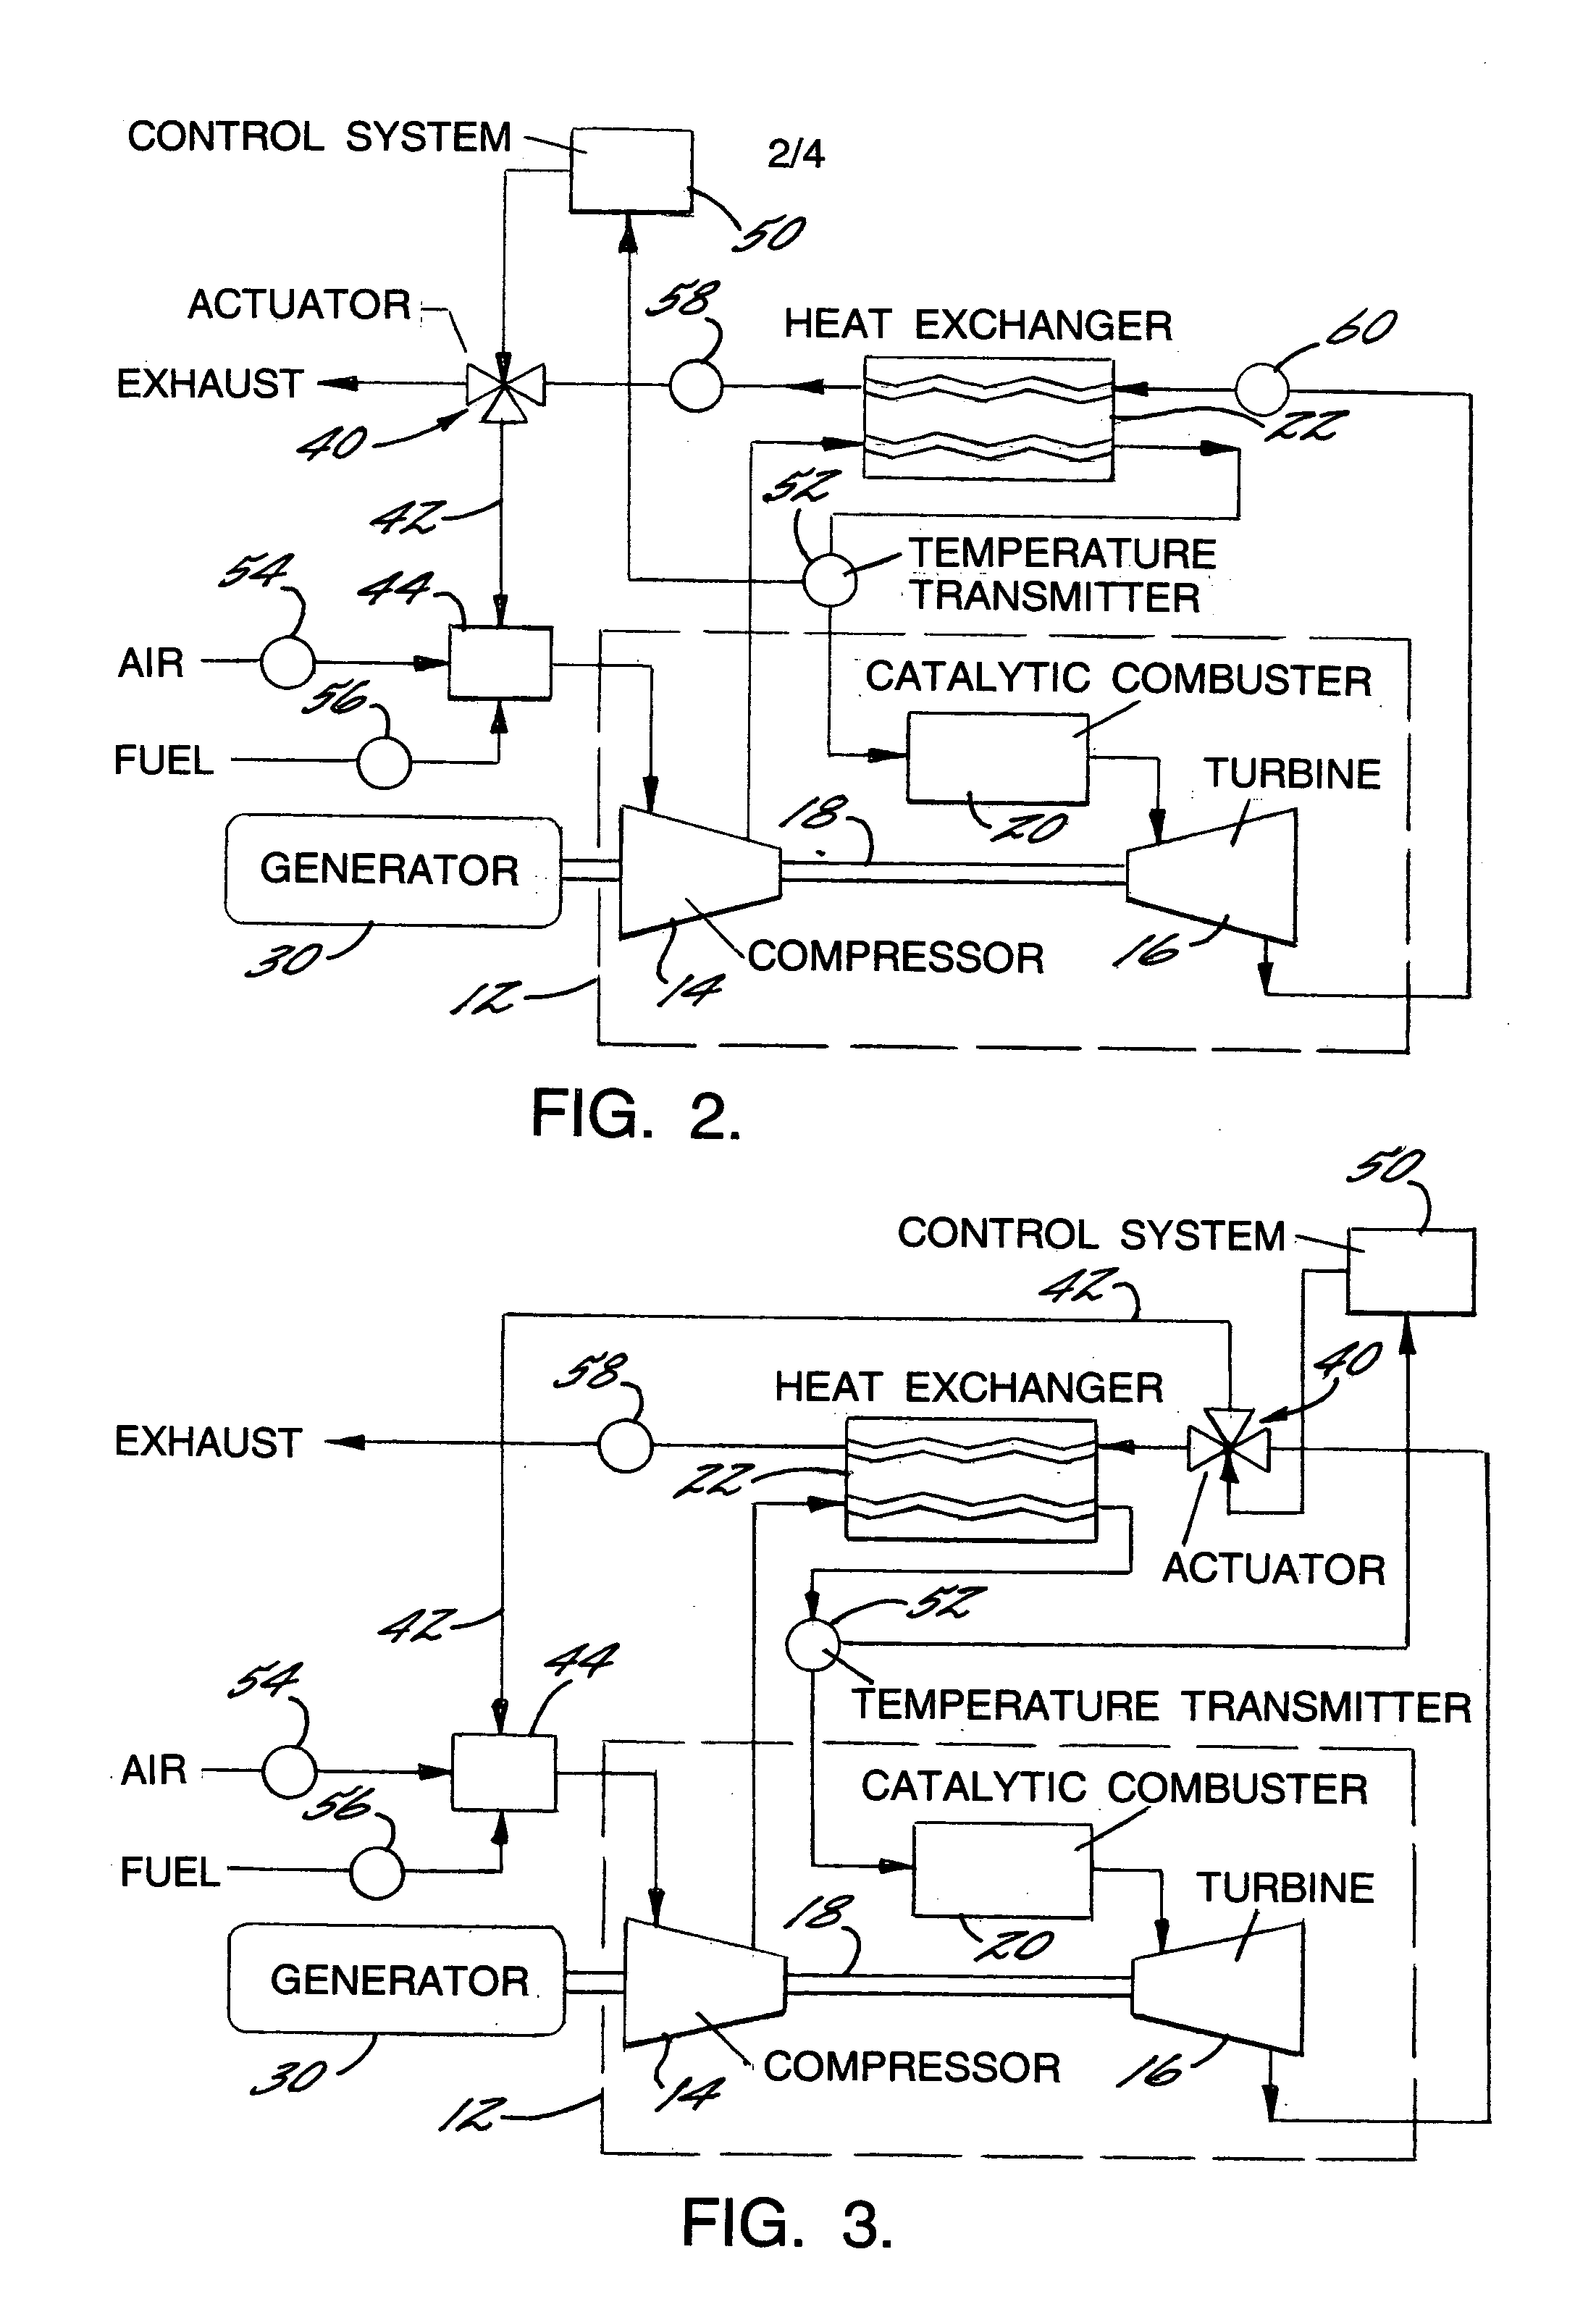 Recuperated gas turbine engine system and method employing catalytic combustion